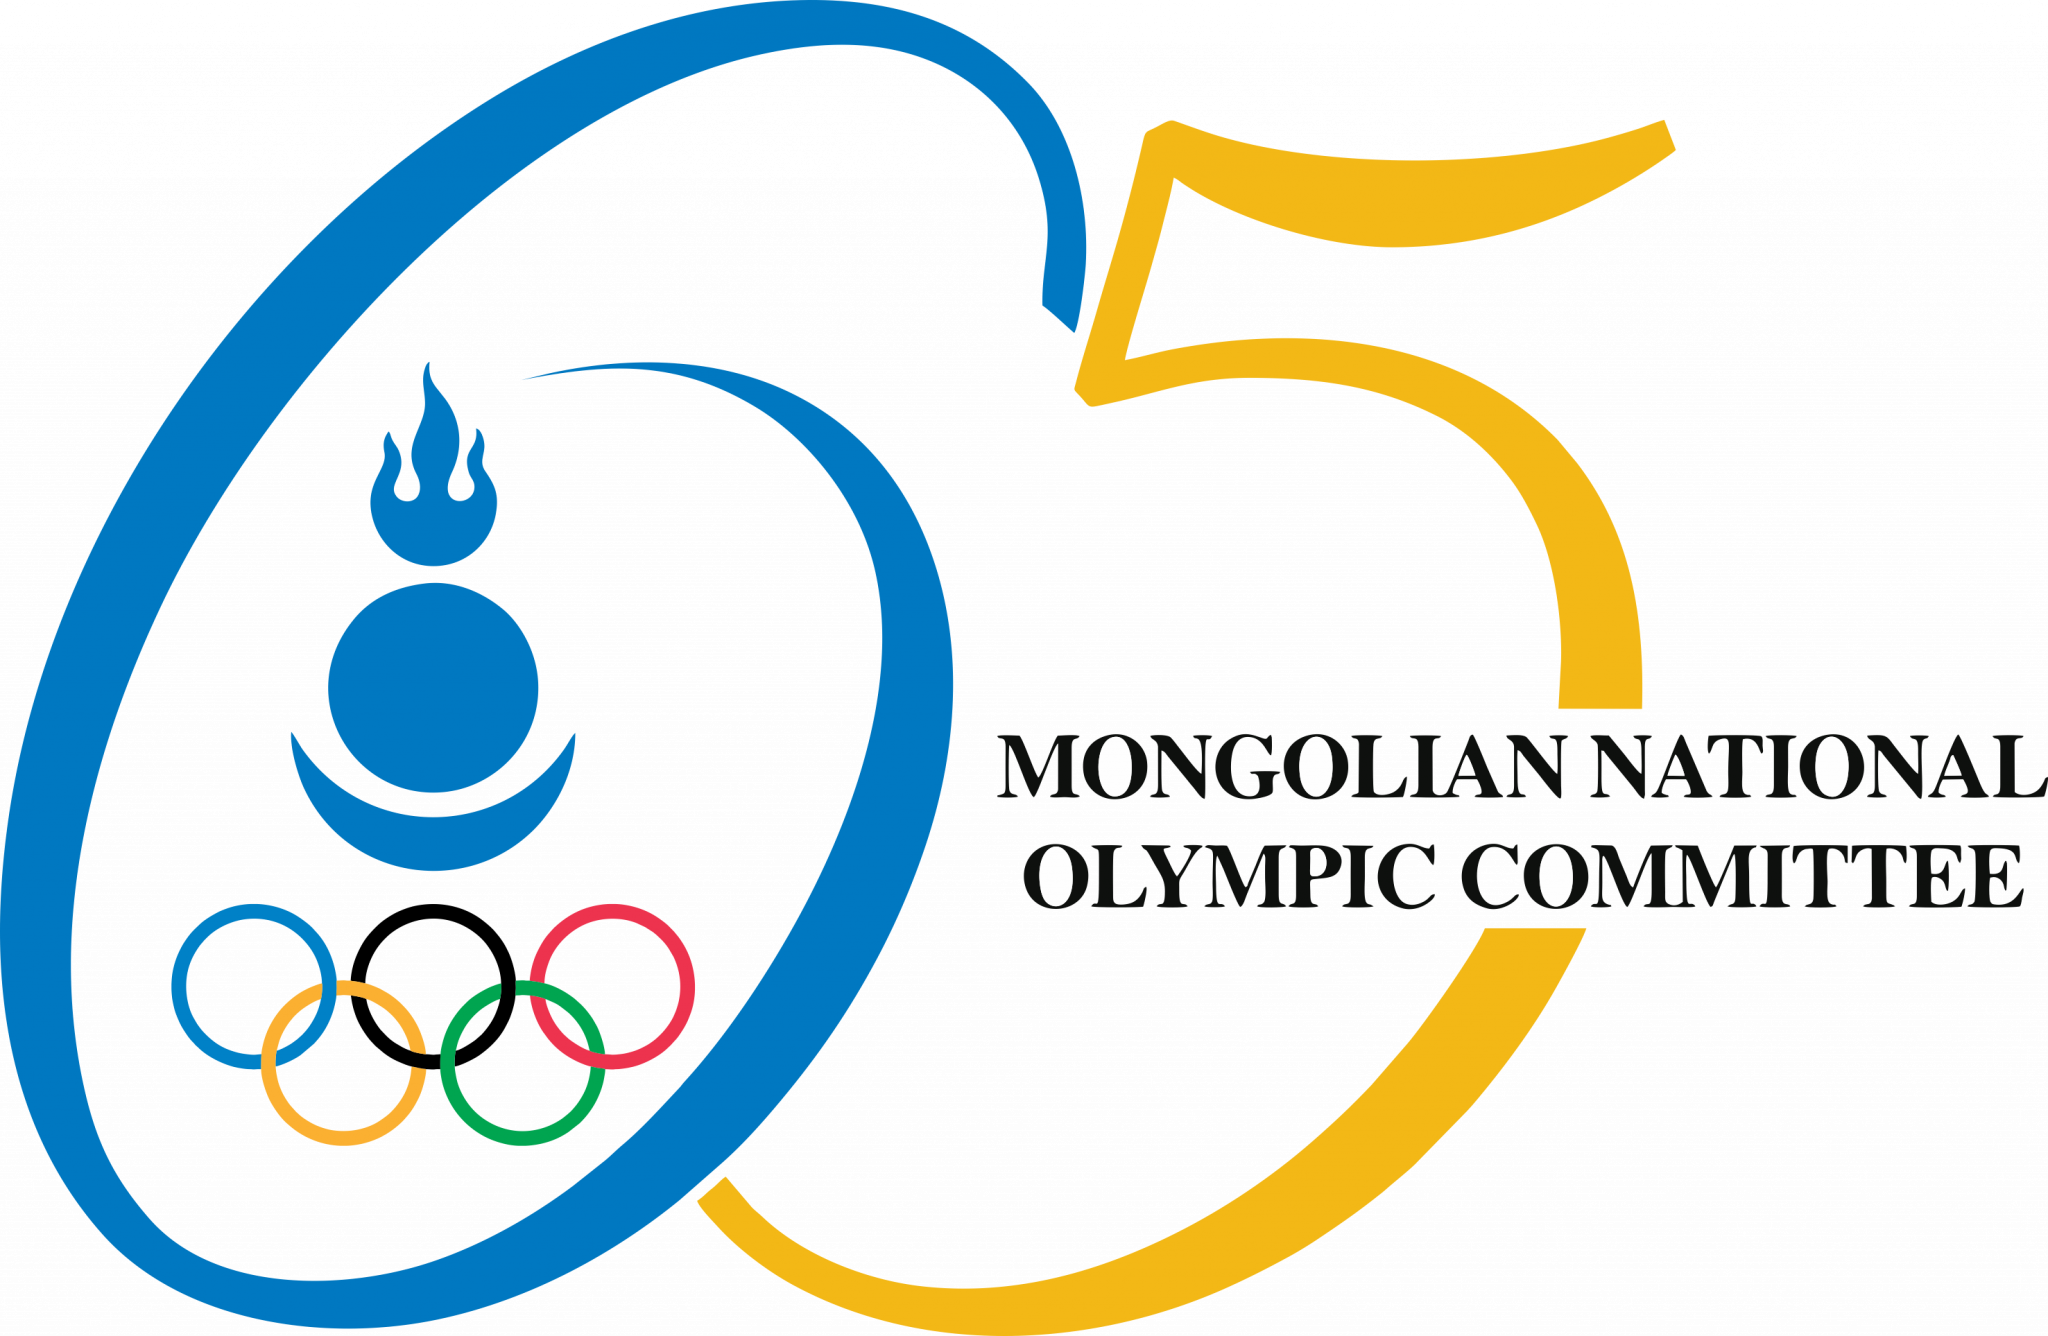 Past Presidents gather to mark 65th anniversary of Mongolian National Olympic Committee